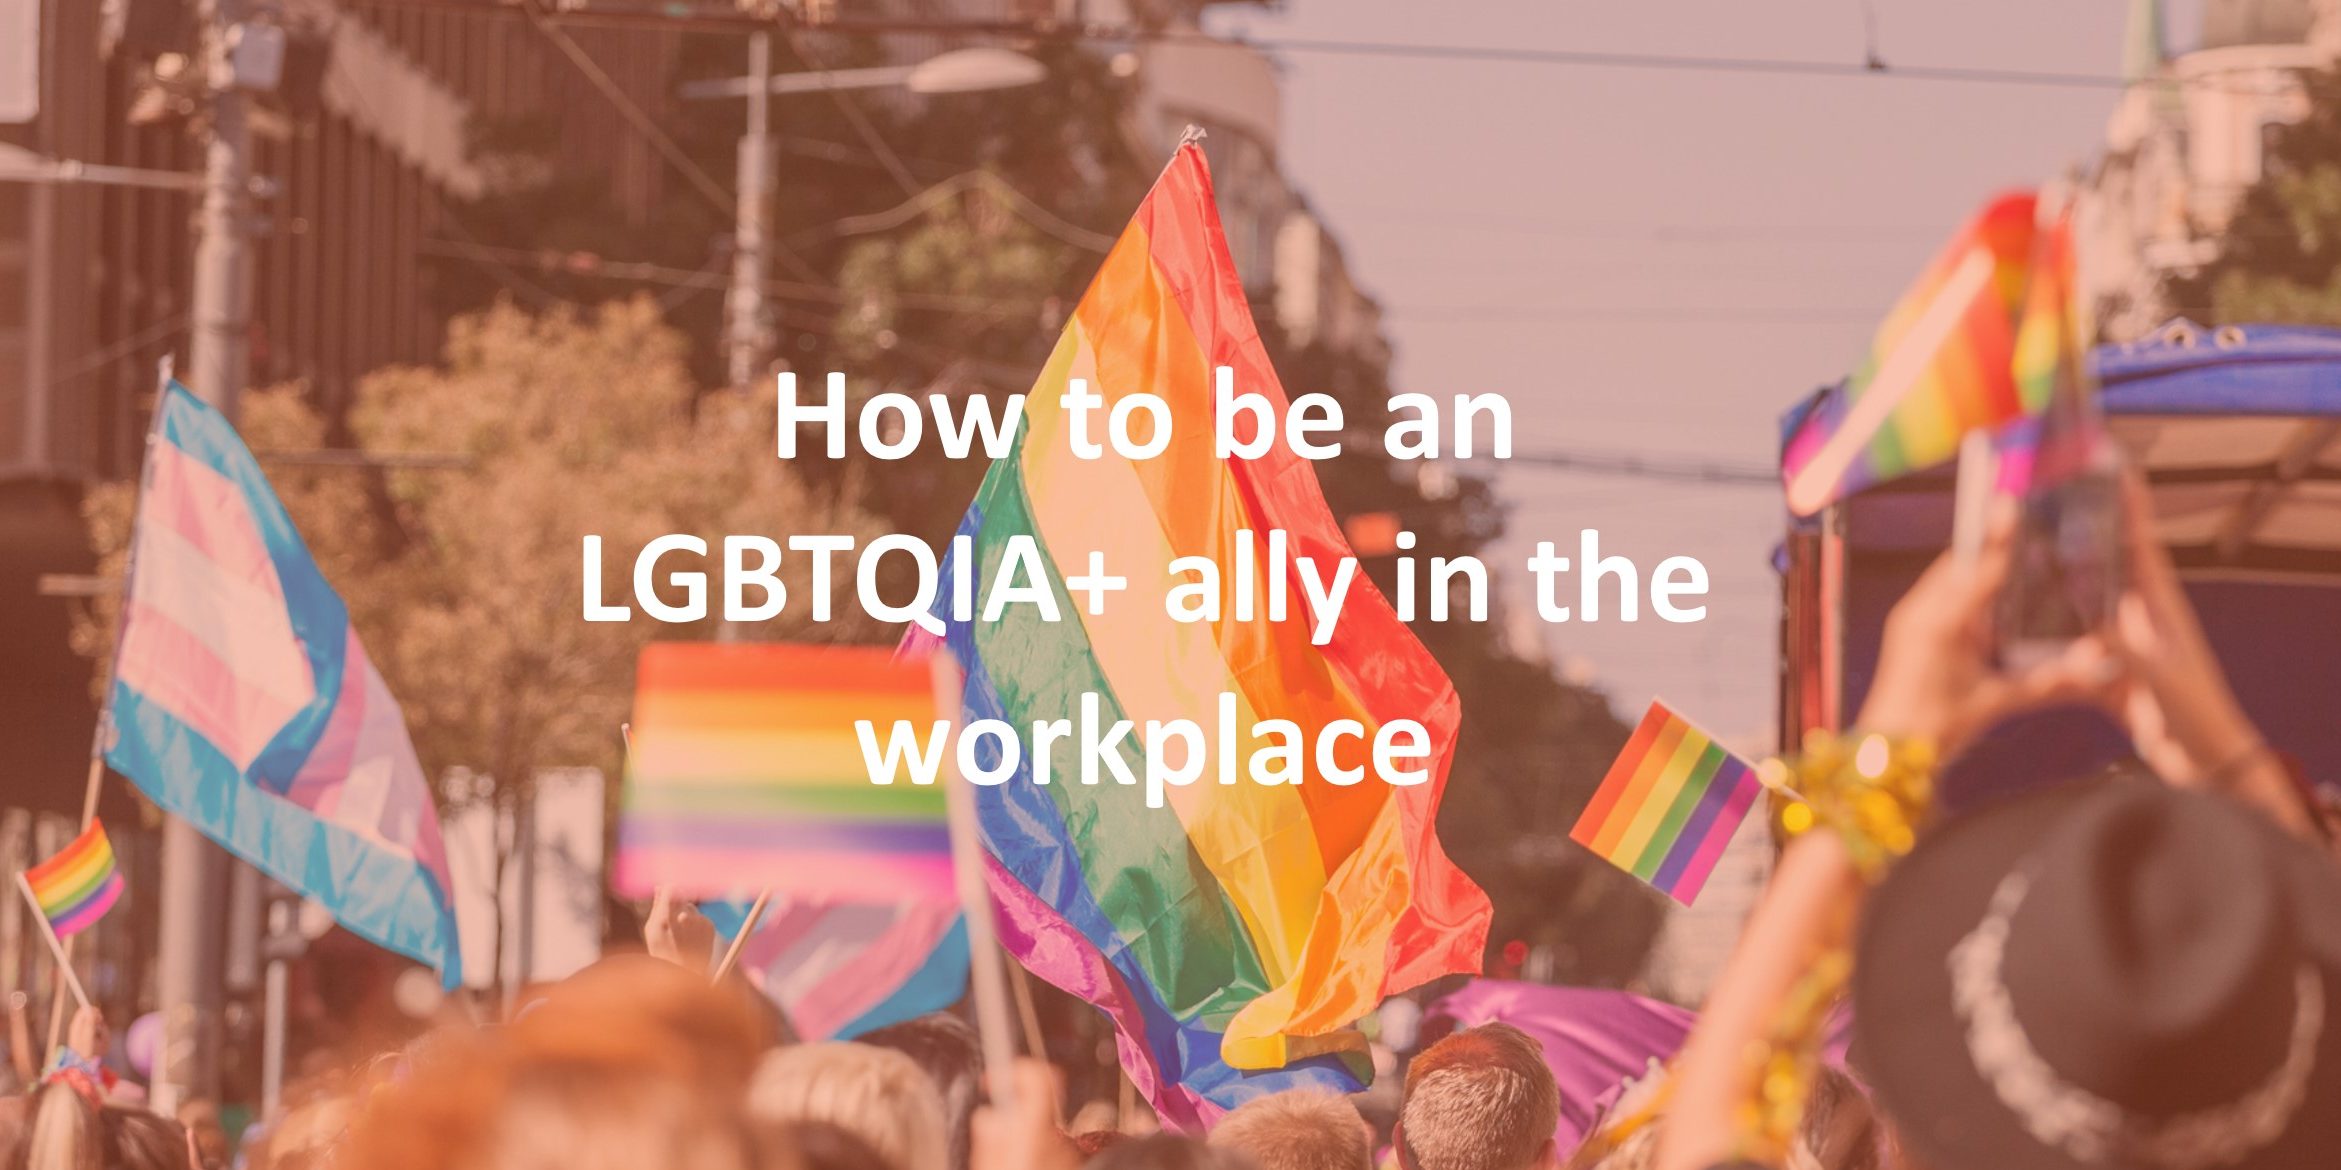 How to be an LGBTQIA+ ally in the workplace